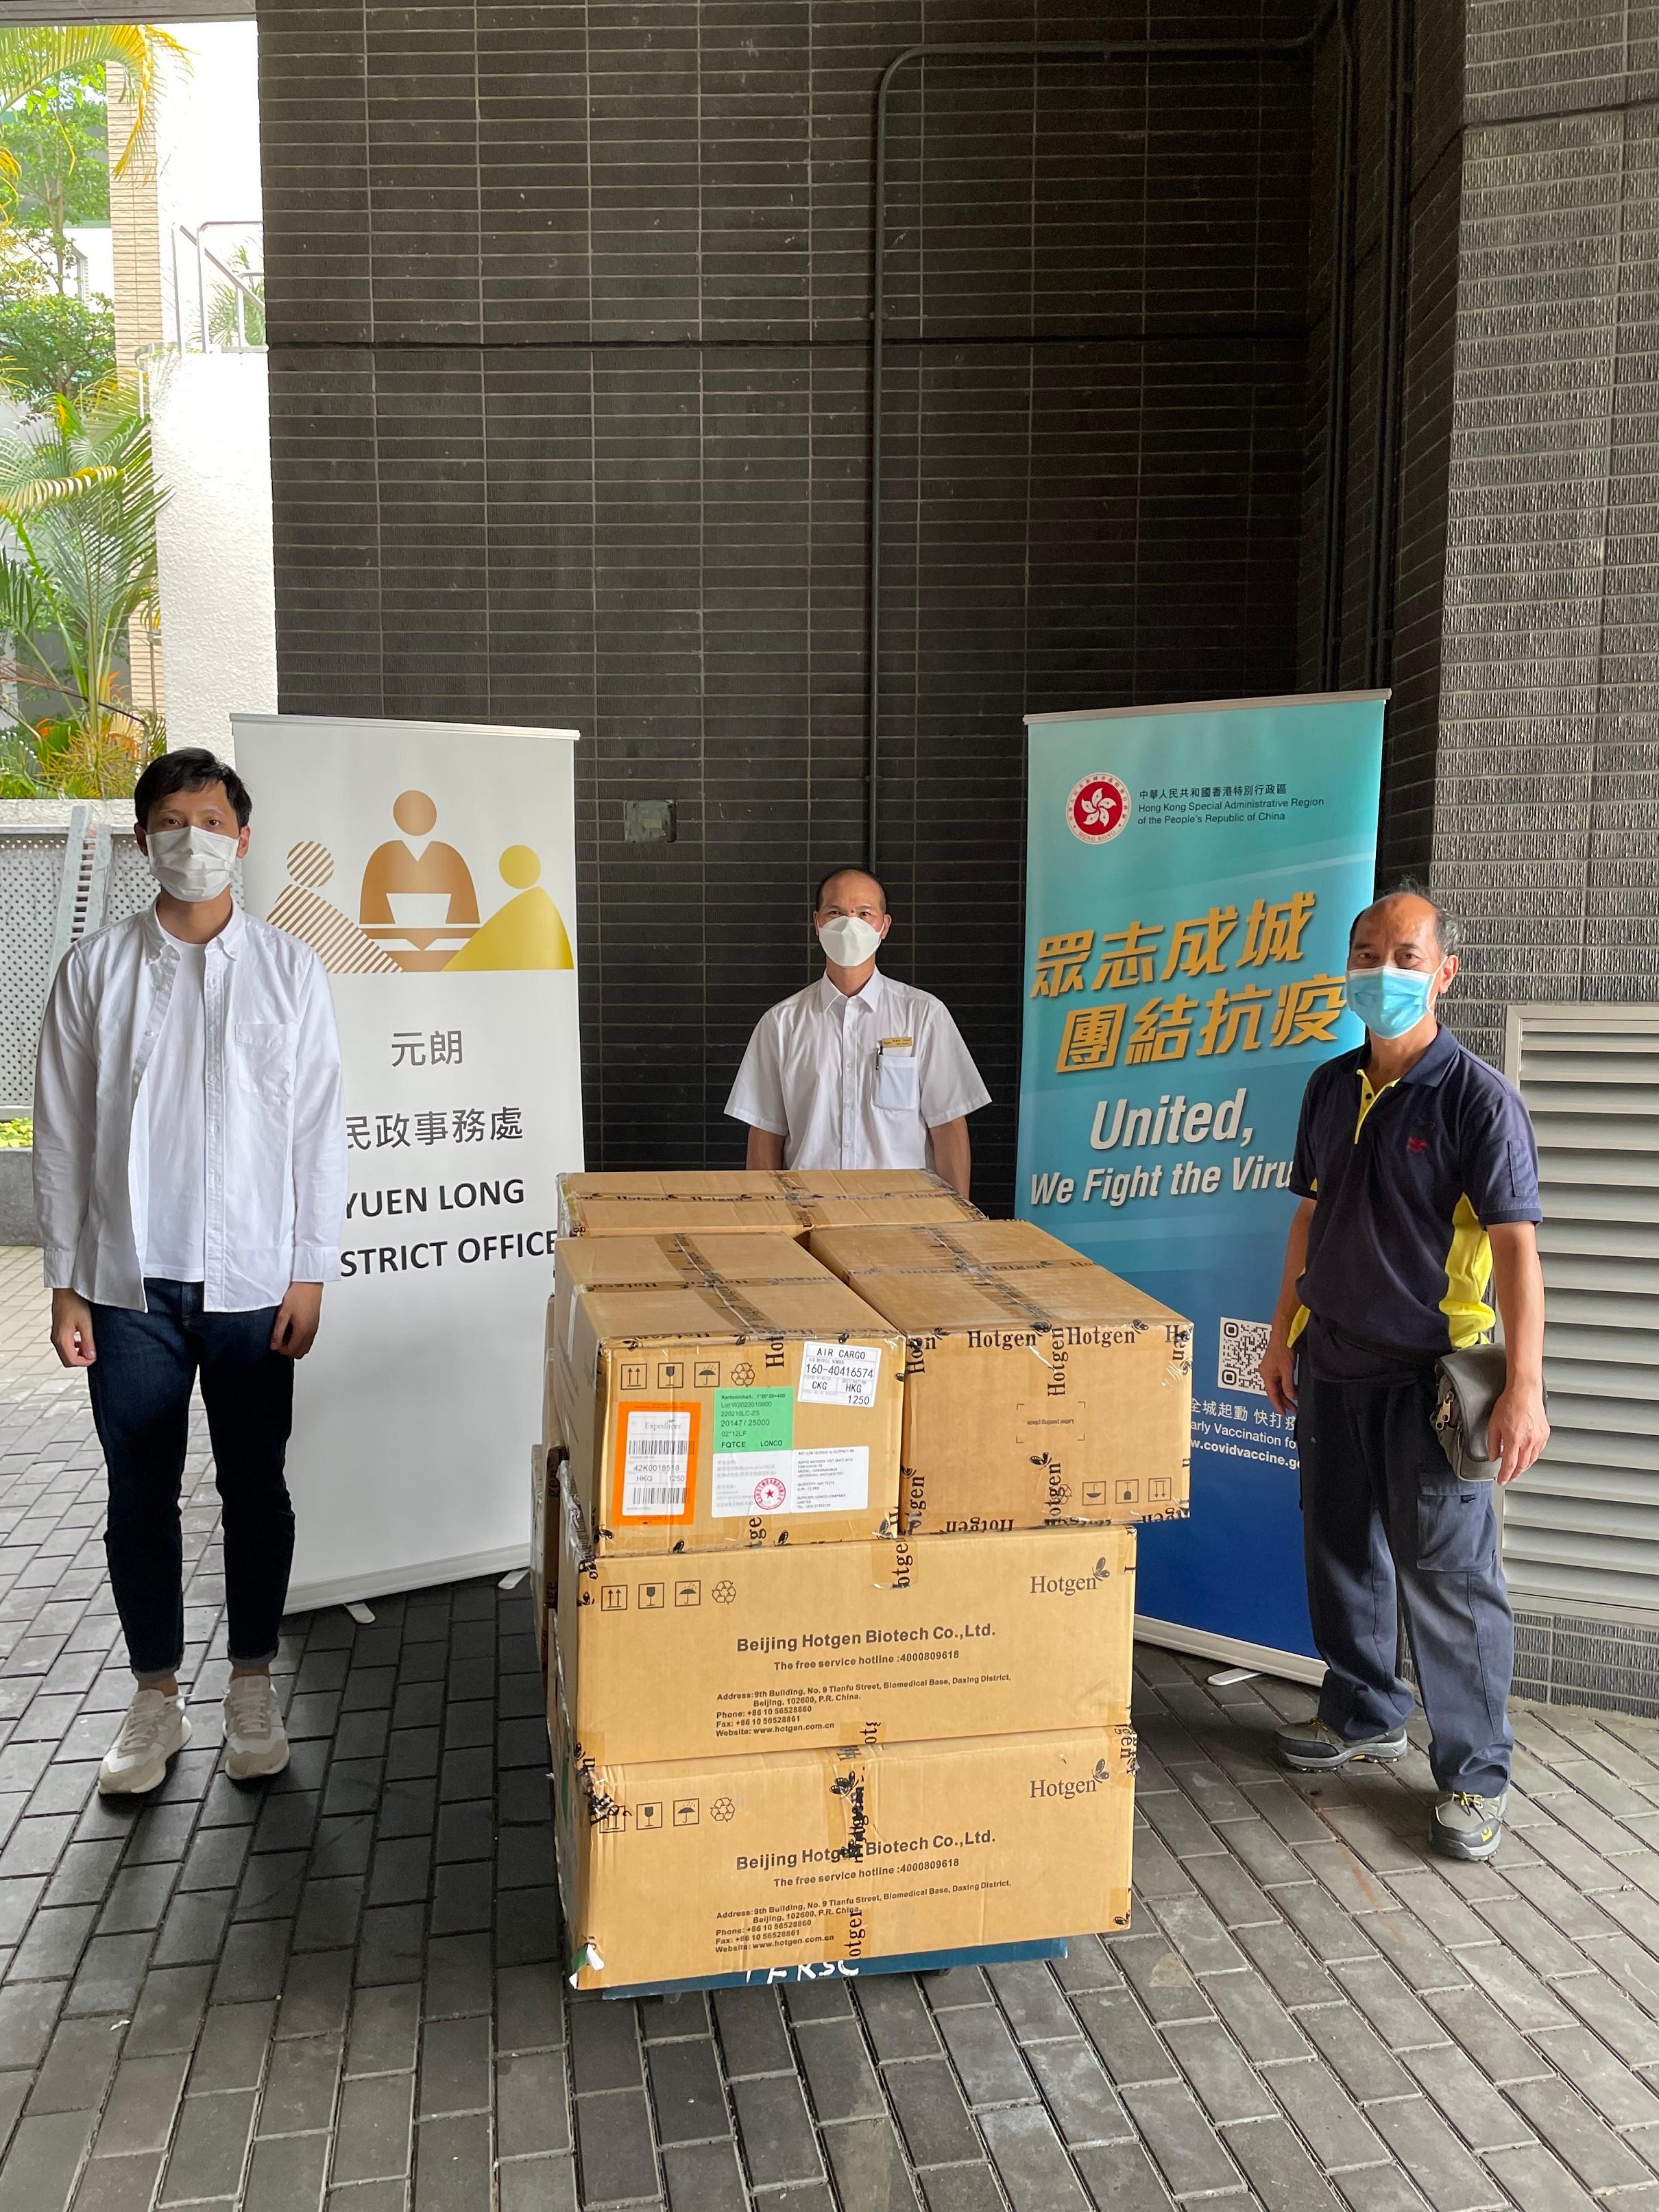 The Yuen Long District Office today (June 21) distributed COVID-19 rapid test kits to households, cleansing workers and property management staff living and working in Meadowlands for voluntary testing through the property management company.